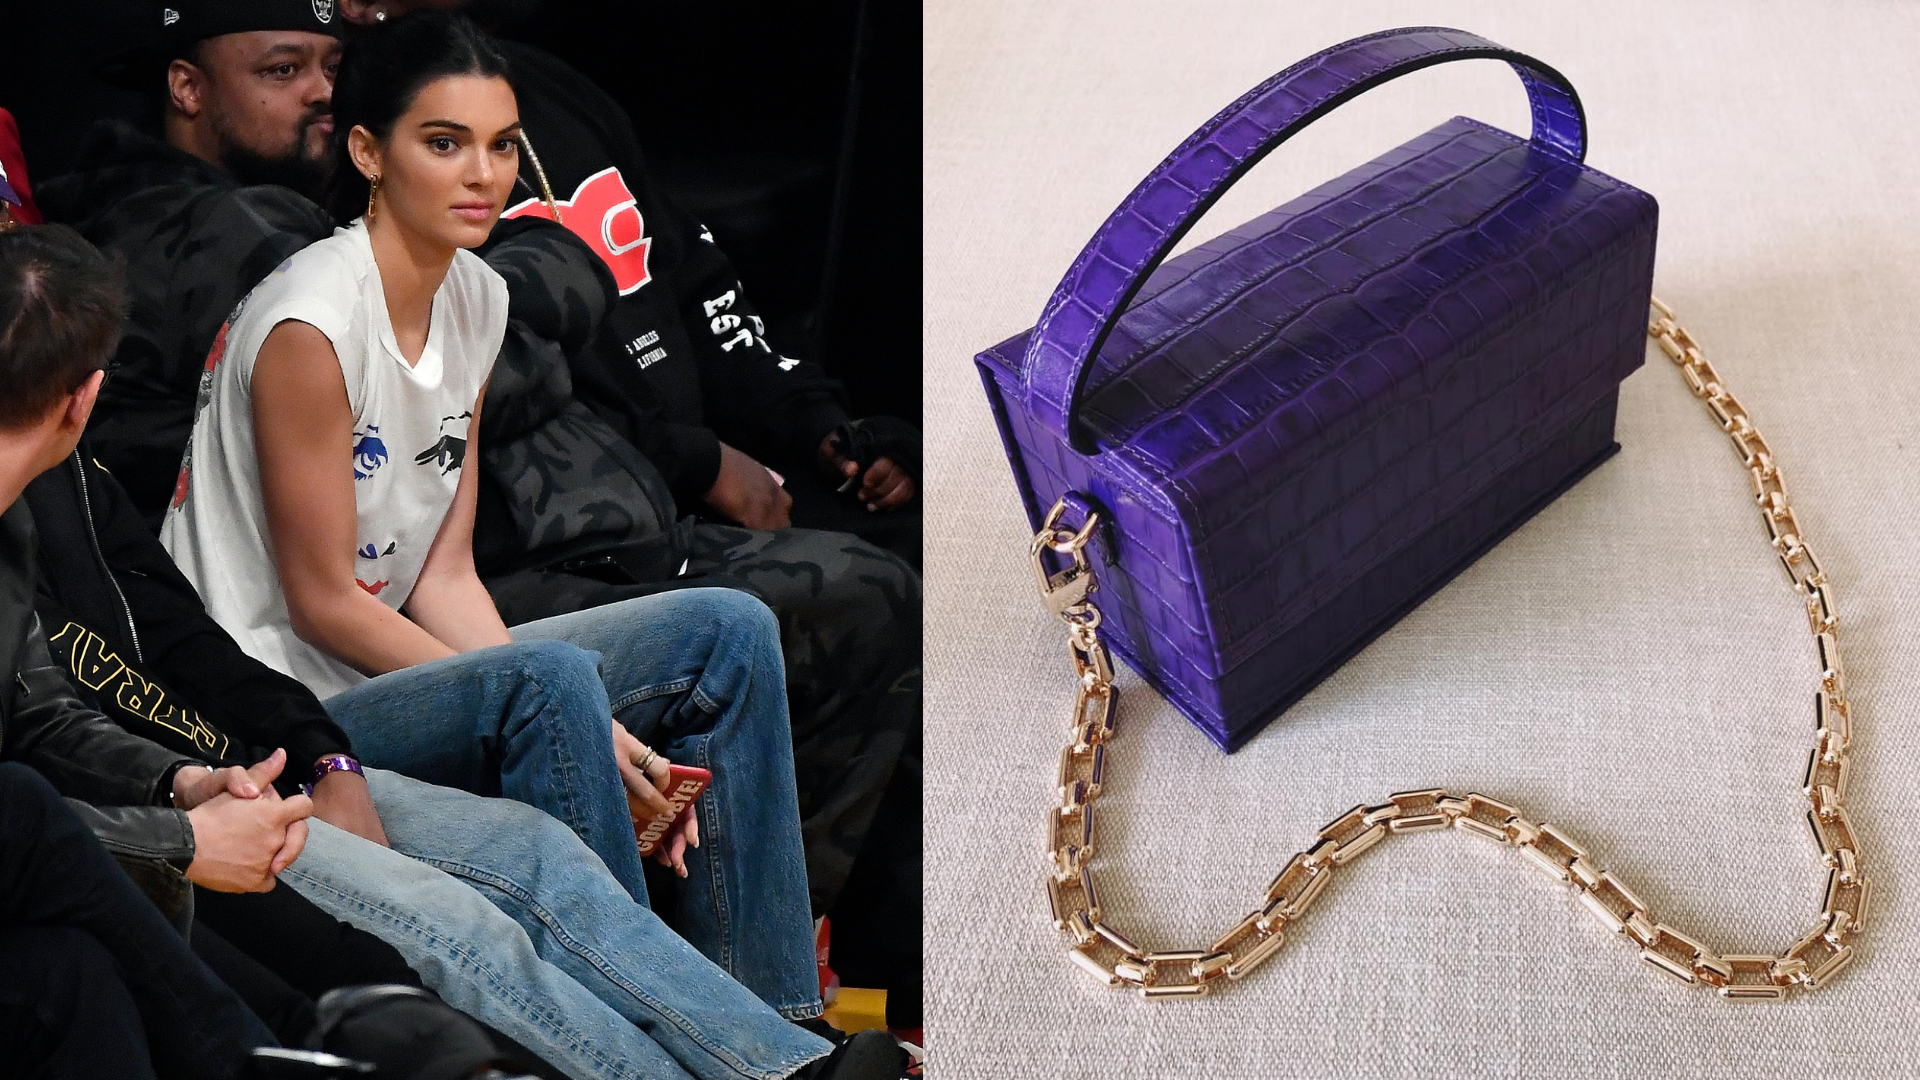 Kendall Jenner Carries Dubai's It Bag Courtside At A Laker's Game